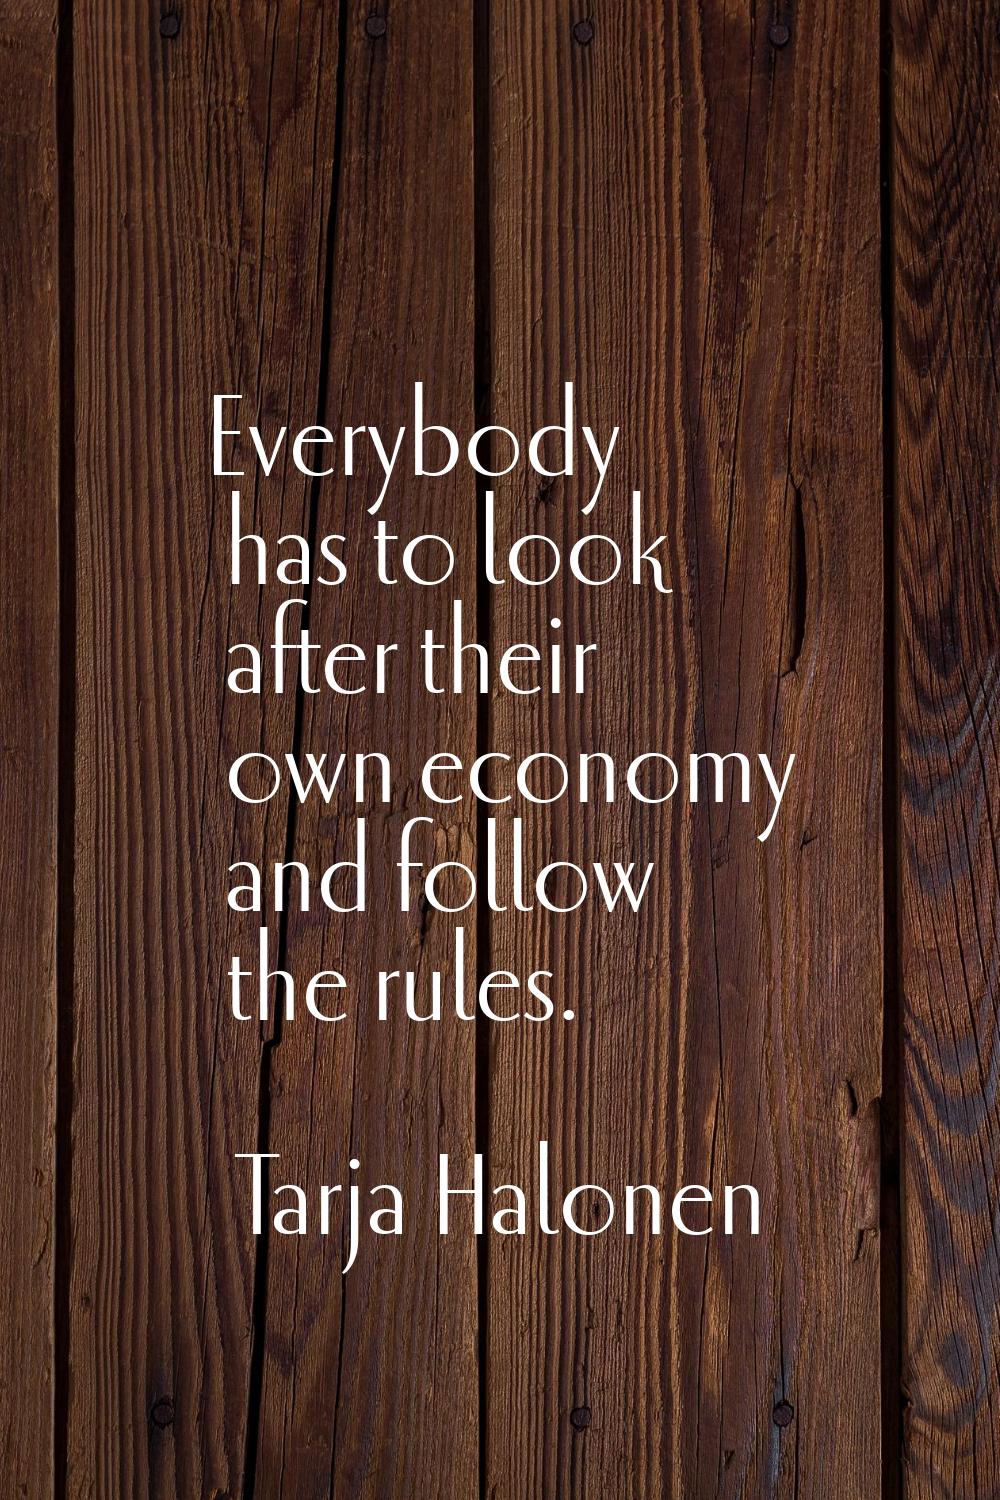 Everybody has to look after their own economy and follow the rules.